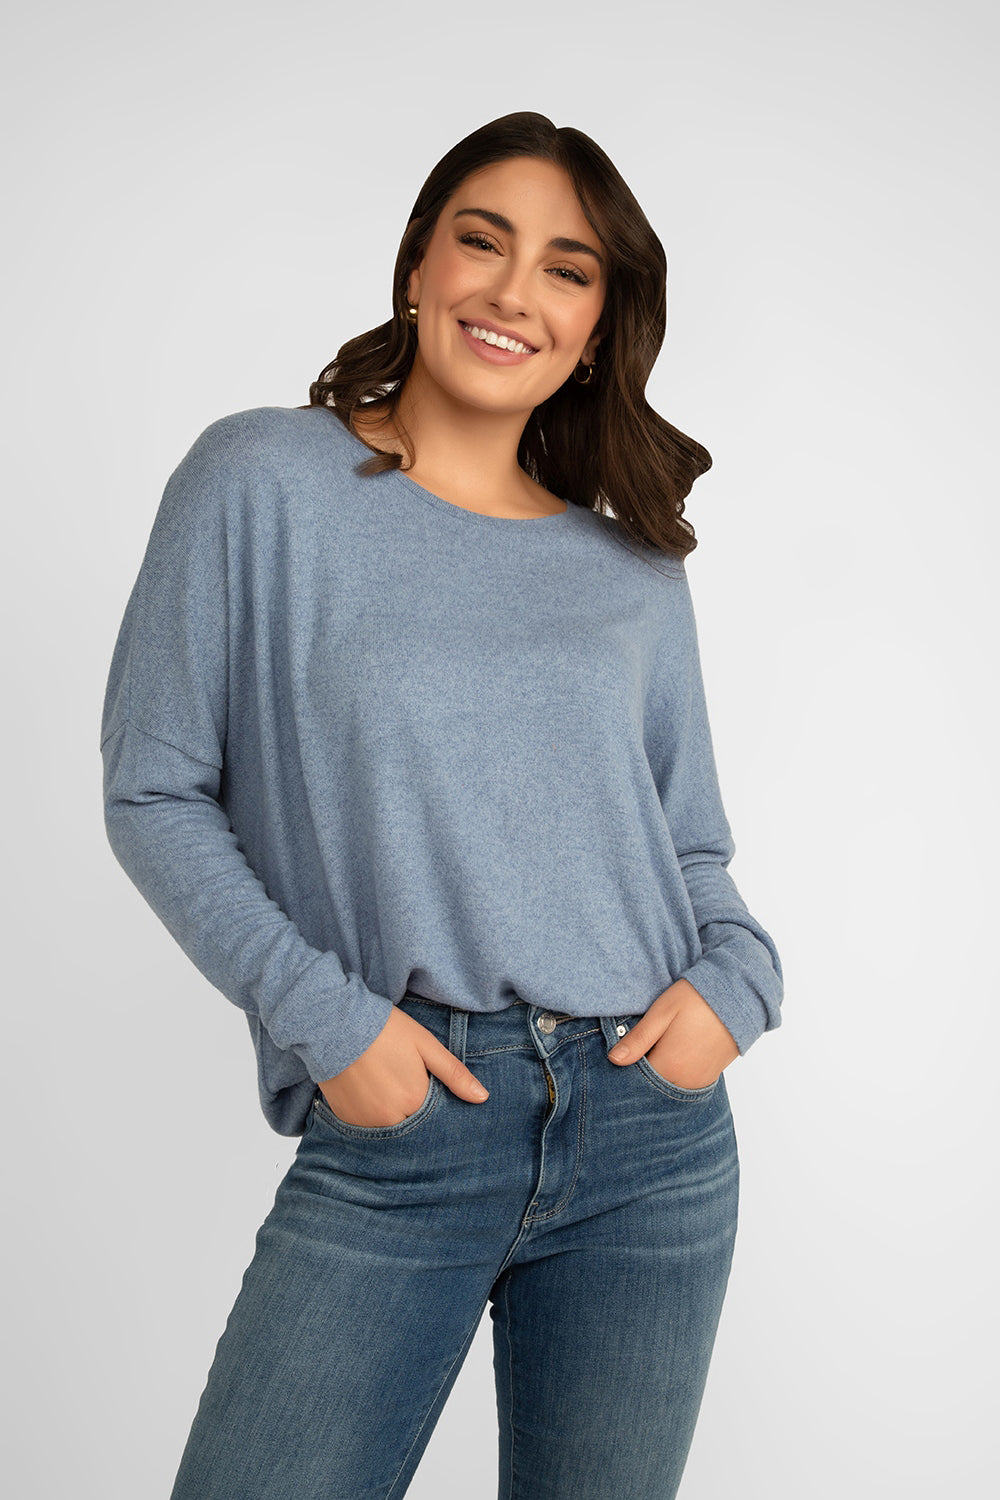 Soya Concept (24788S4) Women's Long Sleeve Brushed Knit Top in Blue